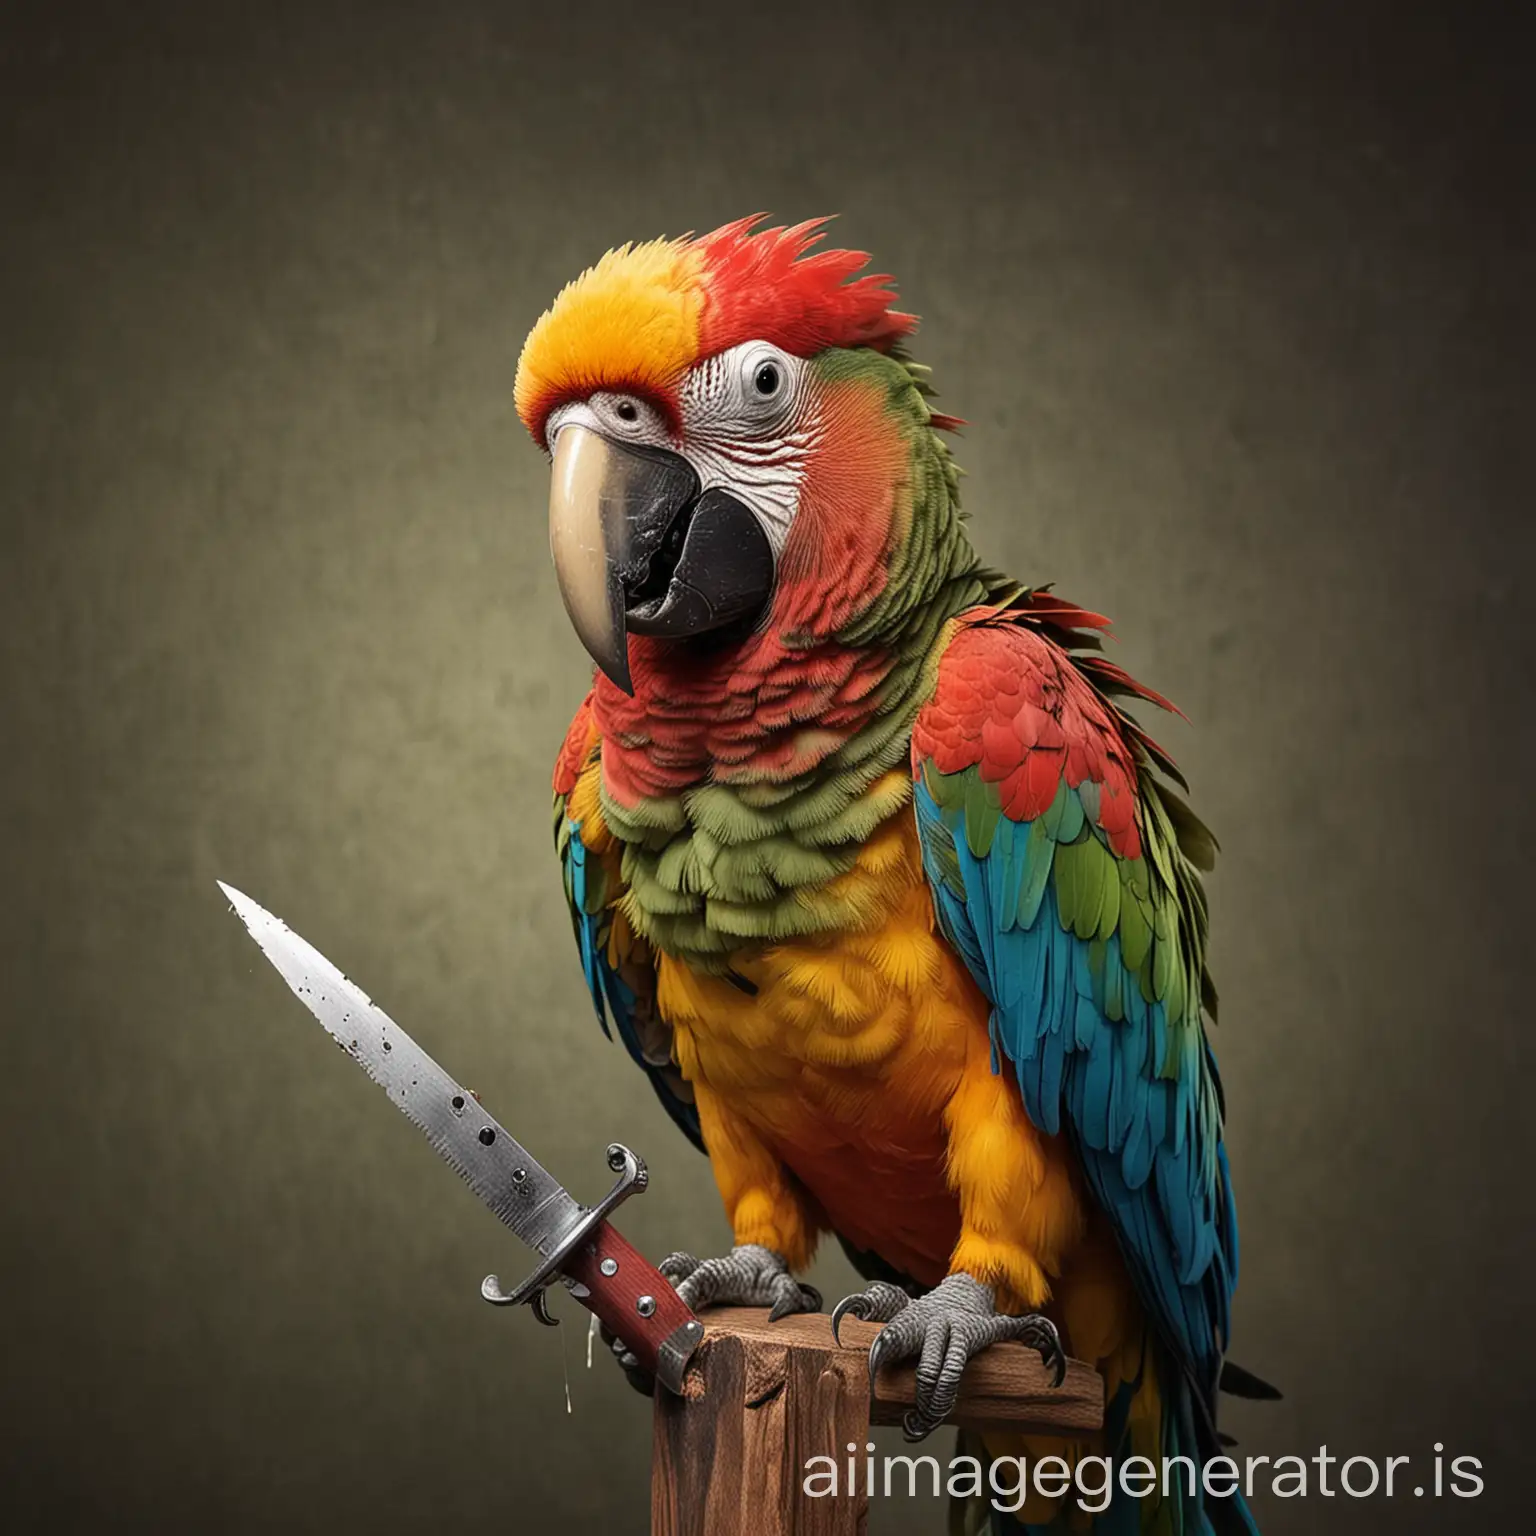 Distressed-Parrot-with-Knife-Injury